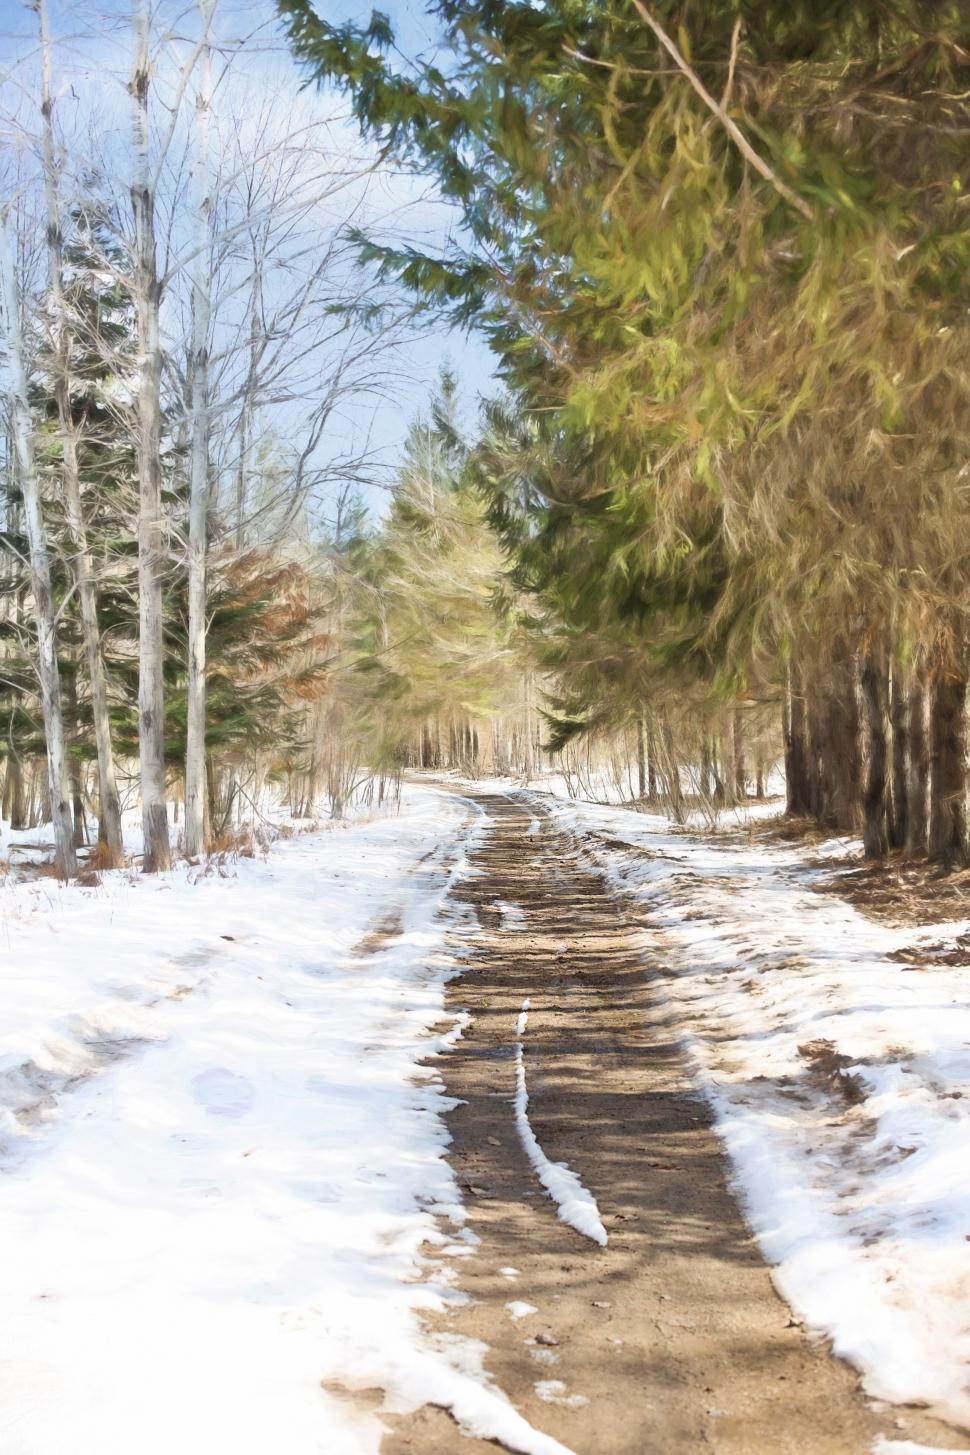 Free Image of Countryside Road and Snow  